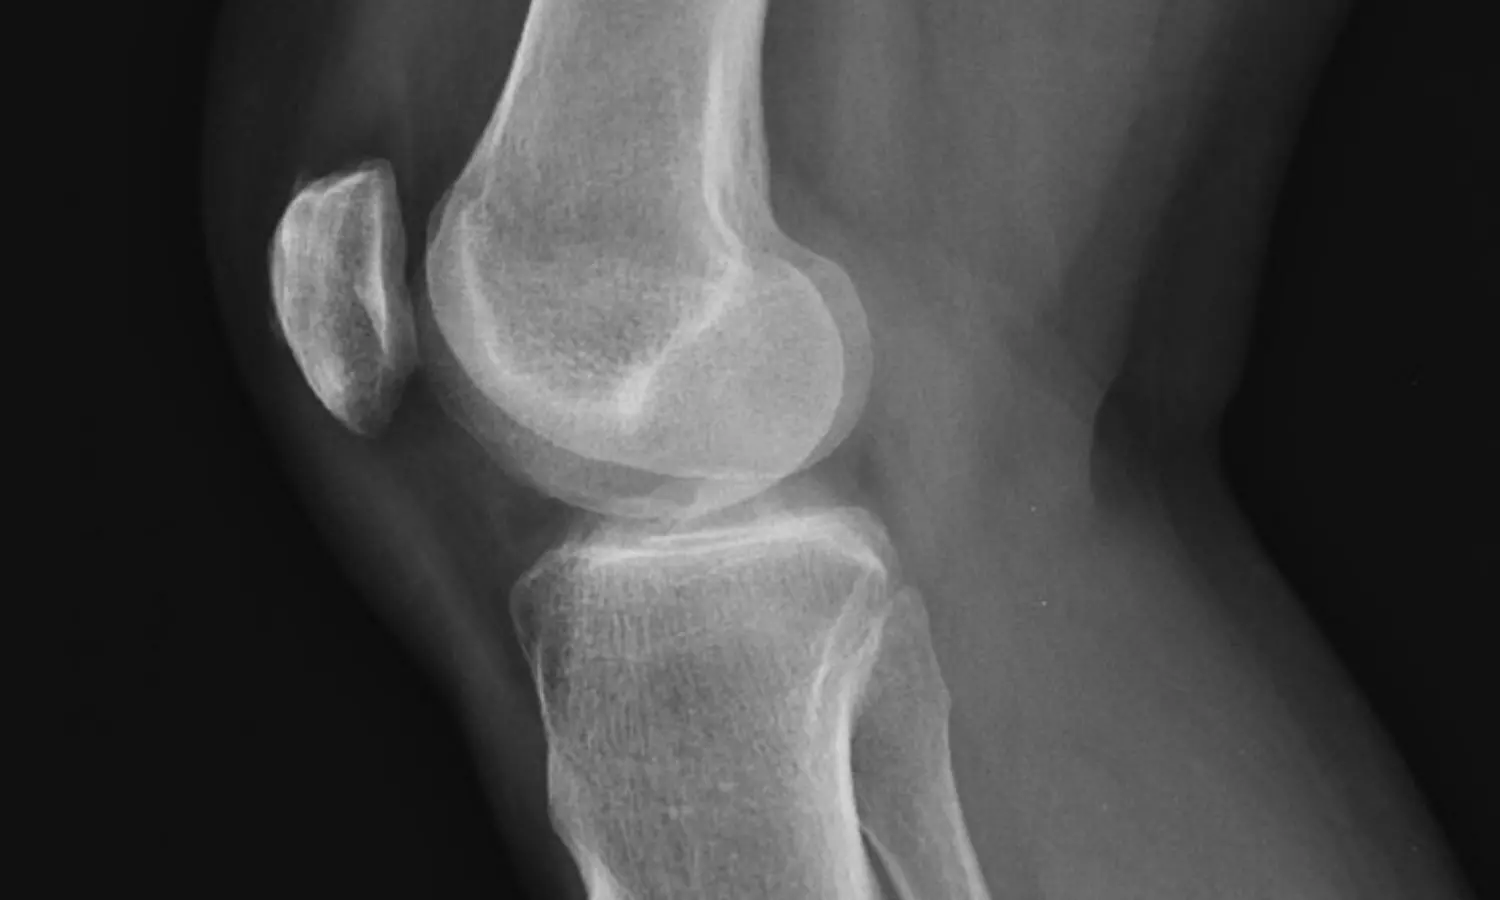 Single Lorecivivint Injection may improve function and pain control in knee osteoarthritis